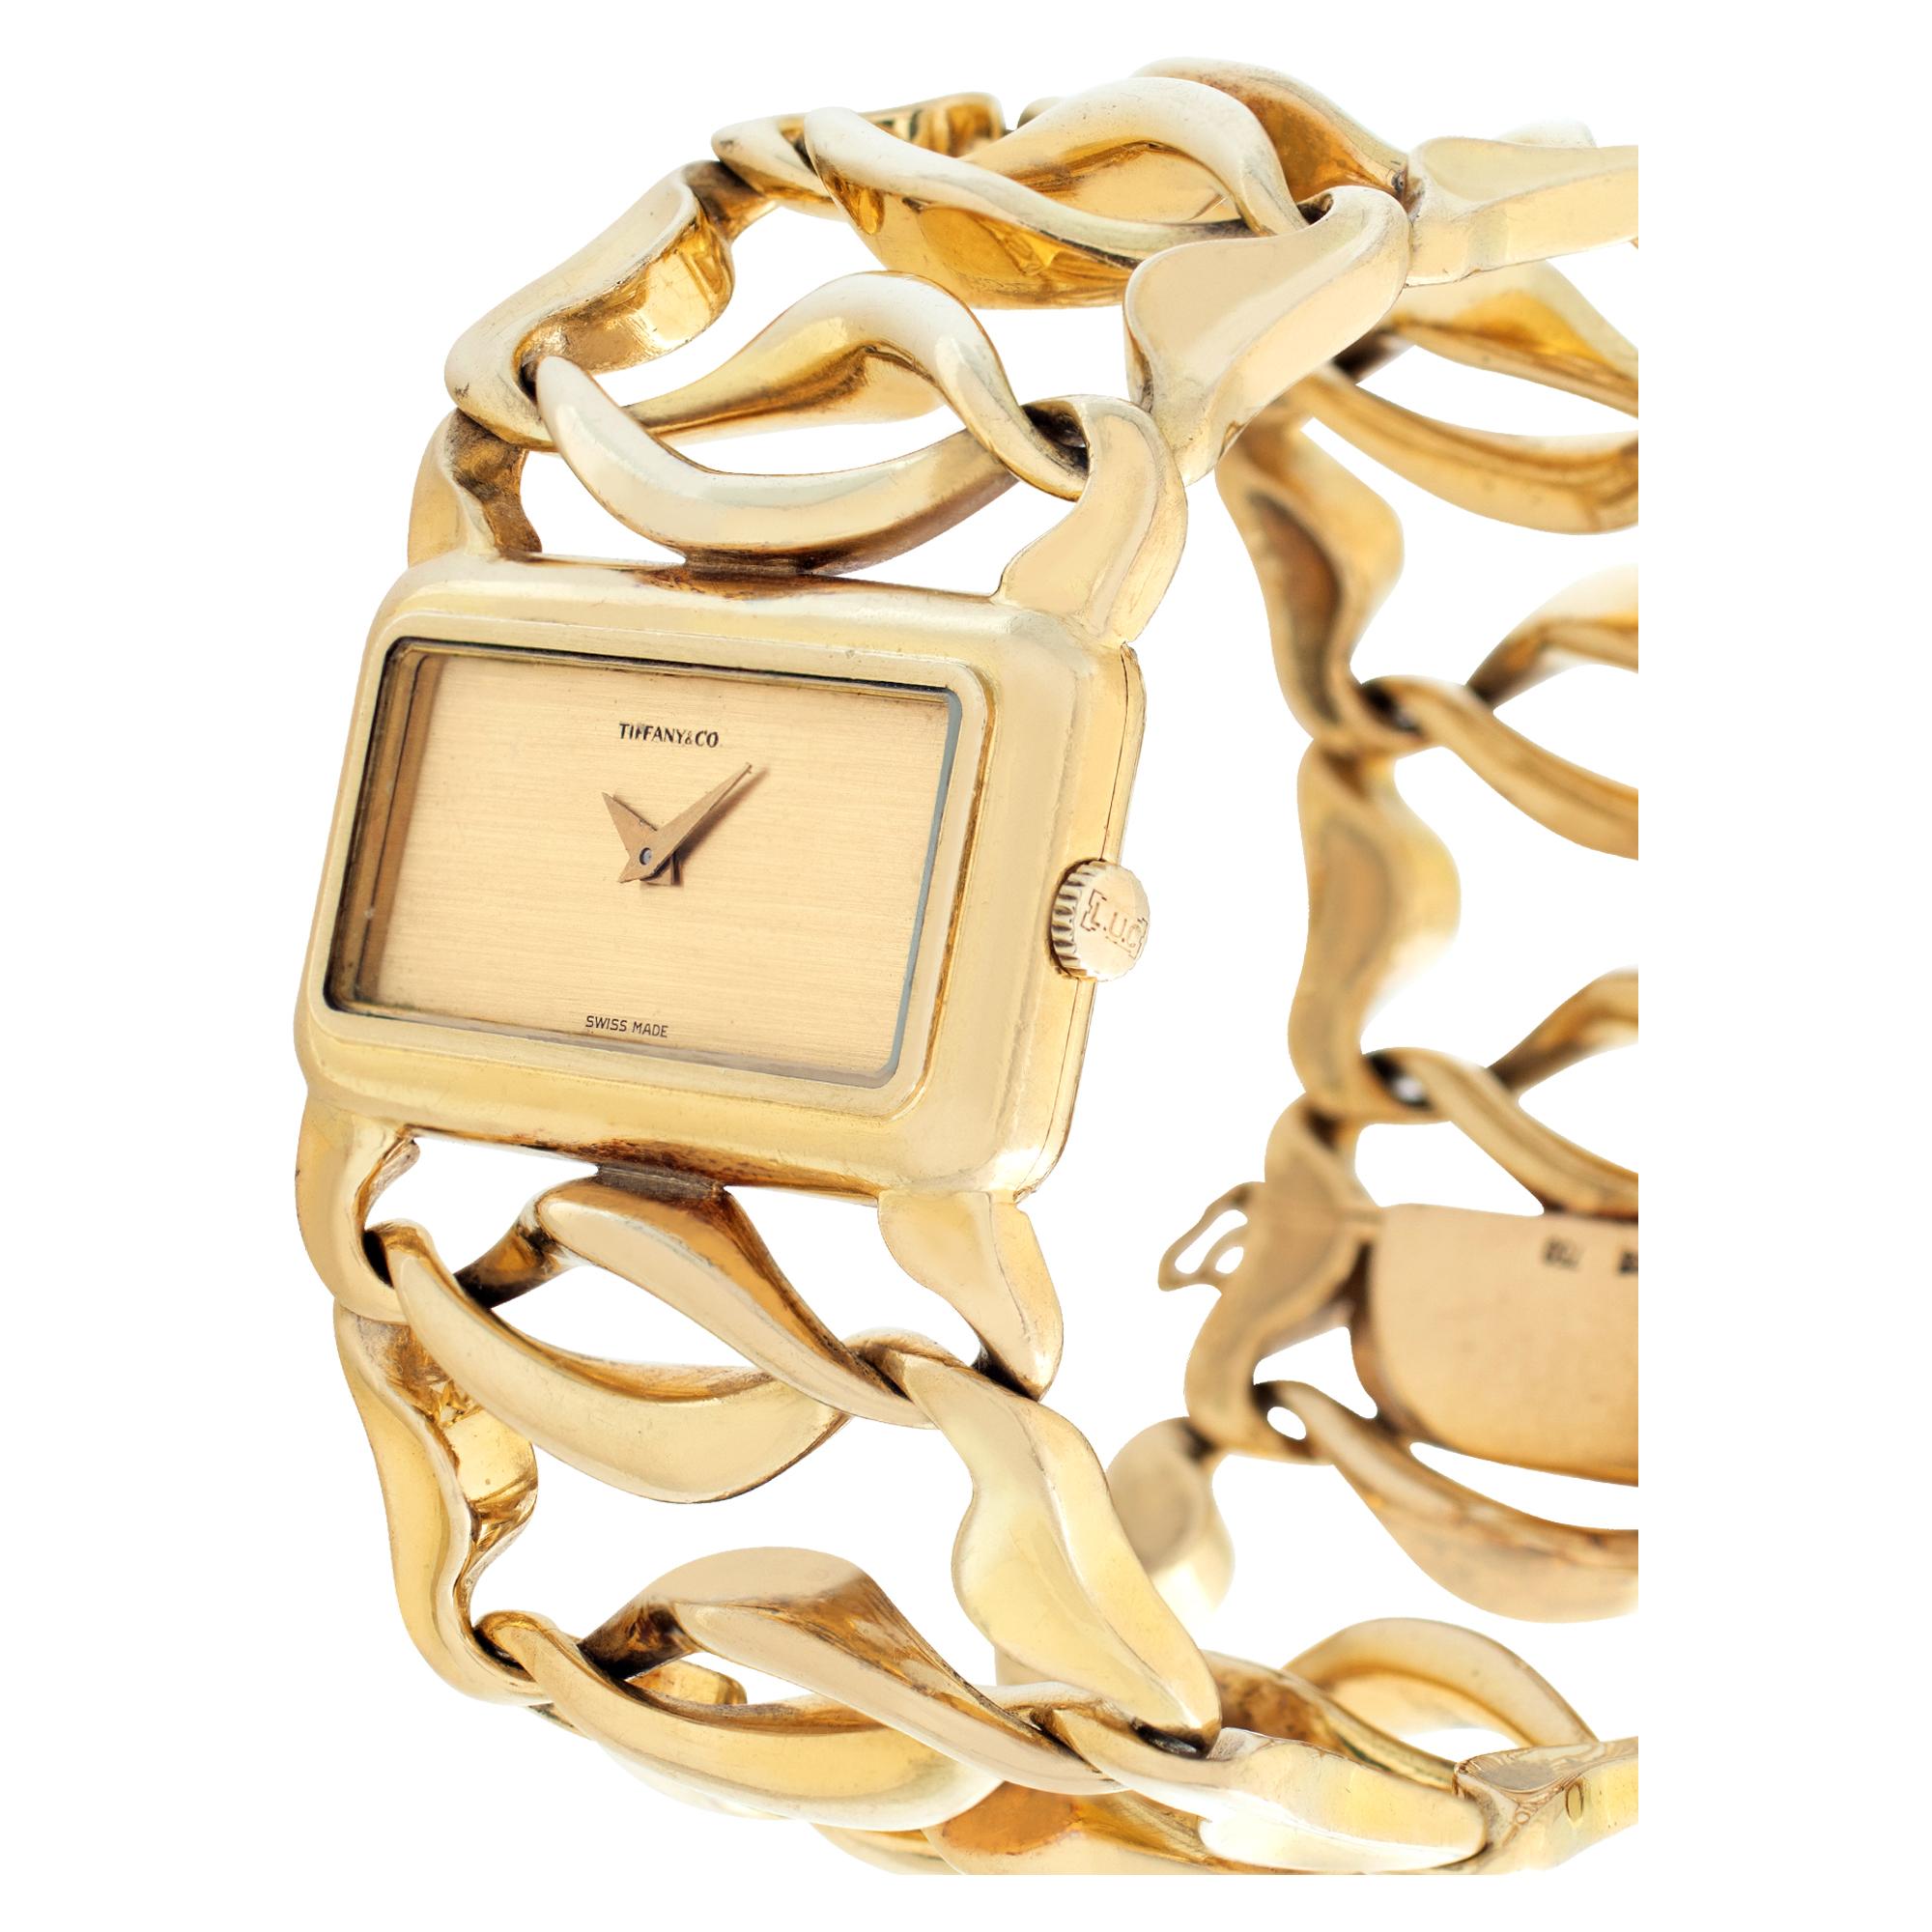 Tiffany & Co. Classic 18k Manual Watch In Excellent Condition For Sale In Surfside, FL